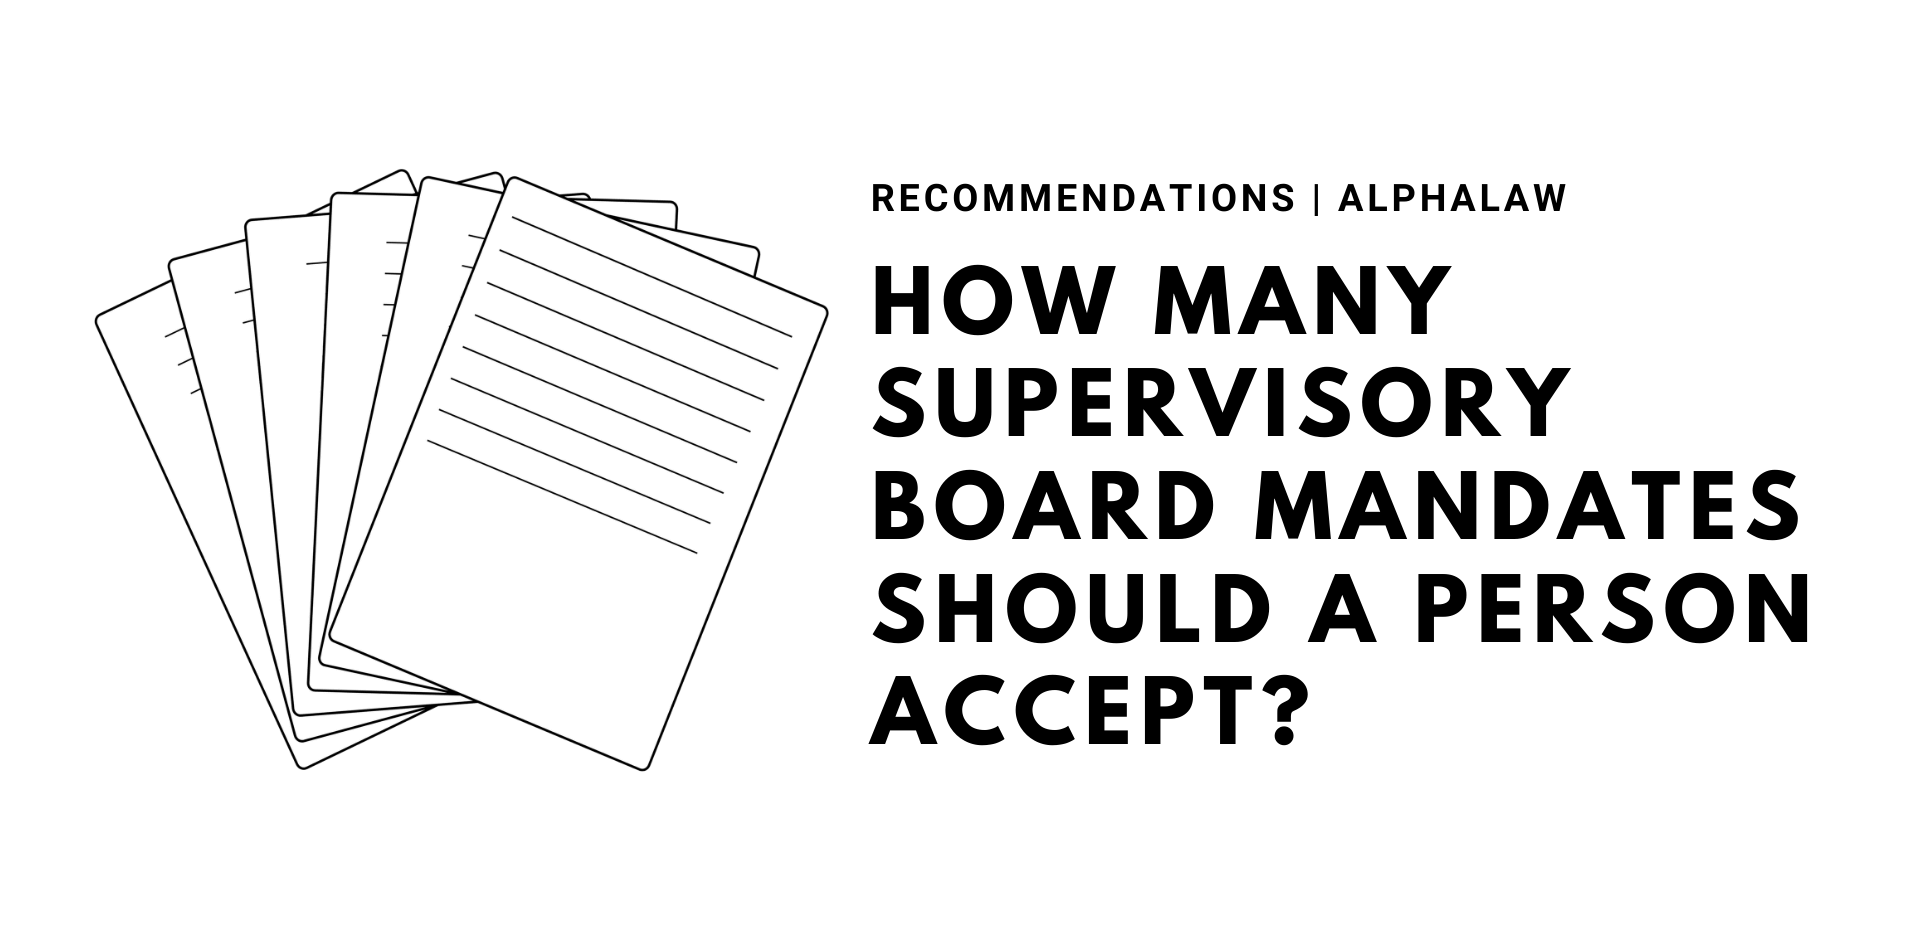 How Many Supervisory Board Mandates Should a Person Accept?